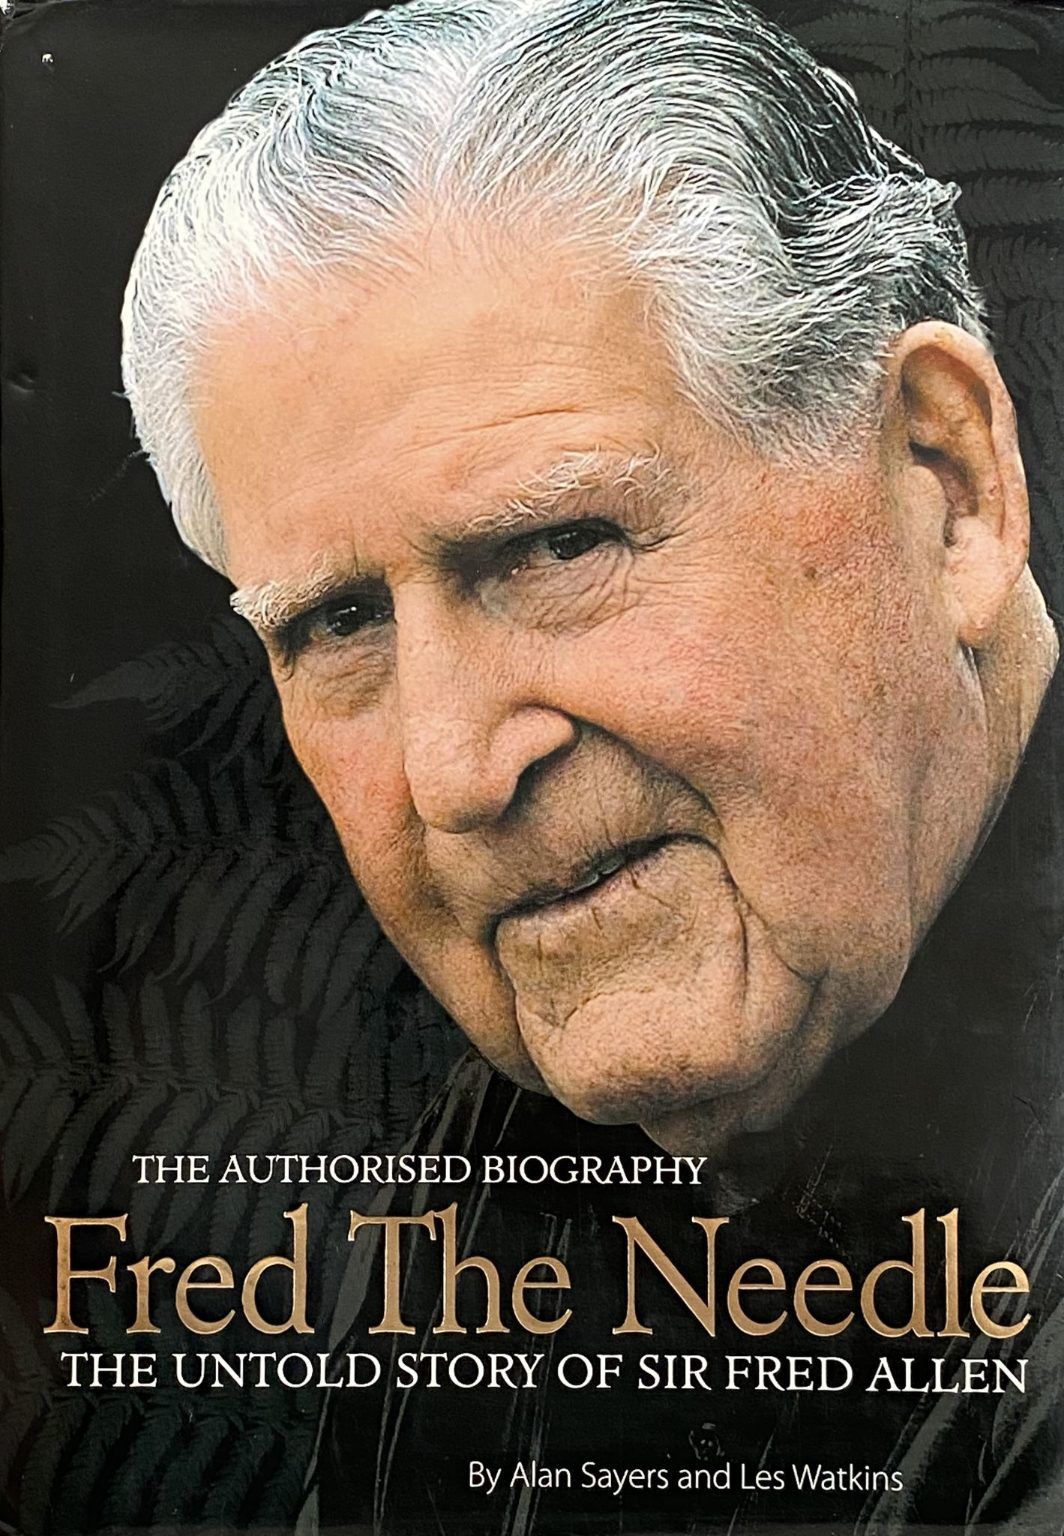 FRED THE NEEDLE: The Untold Story of Sir Fred Allen